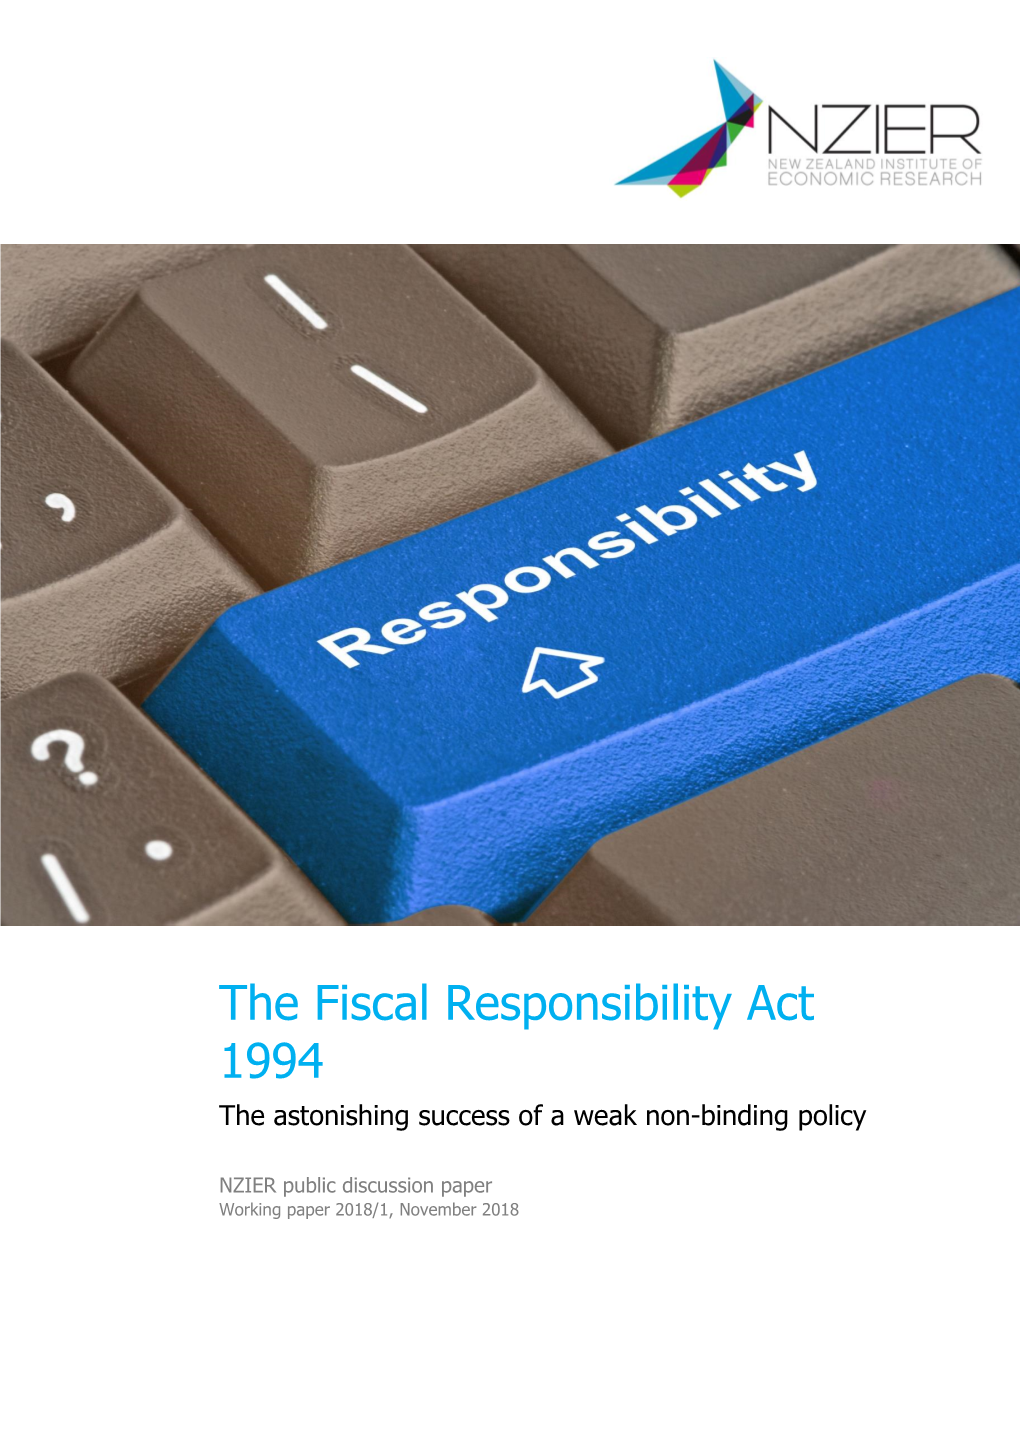 The Fiscal Responsibility Act 1994 the Astonishing Success of a Weak Non-Binding Policy